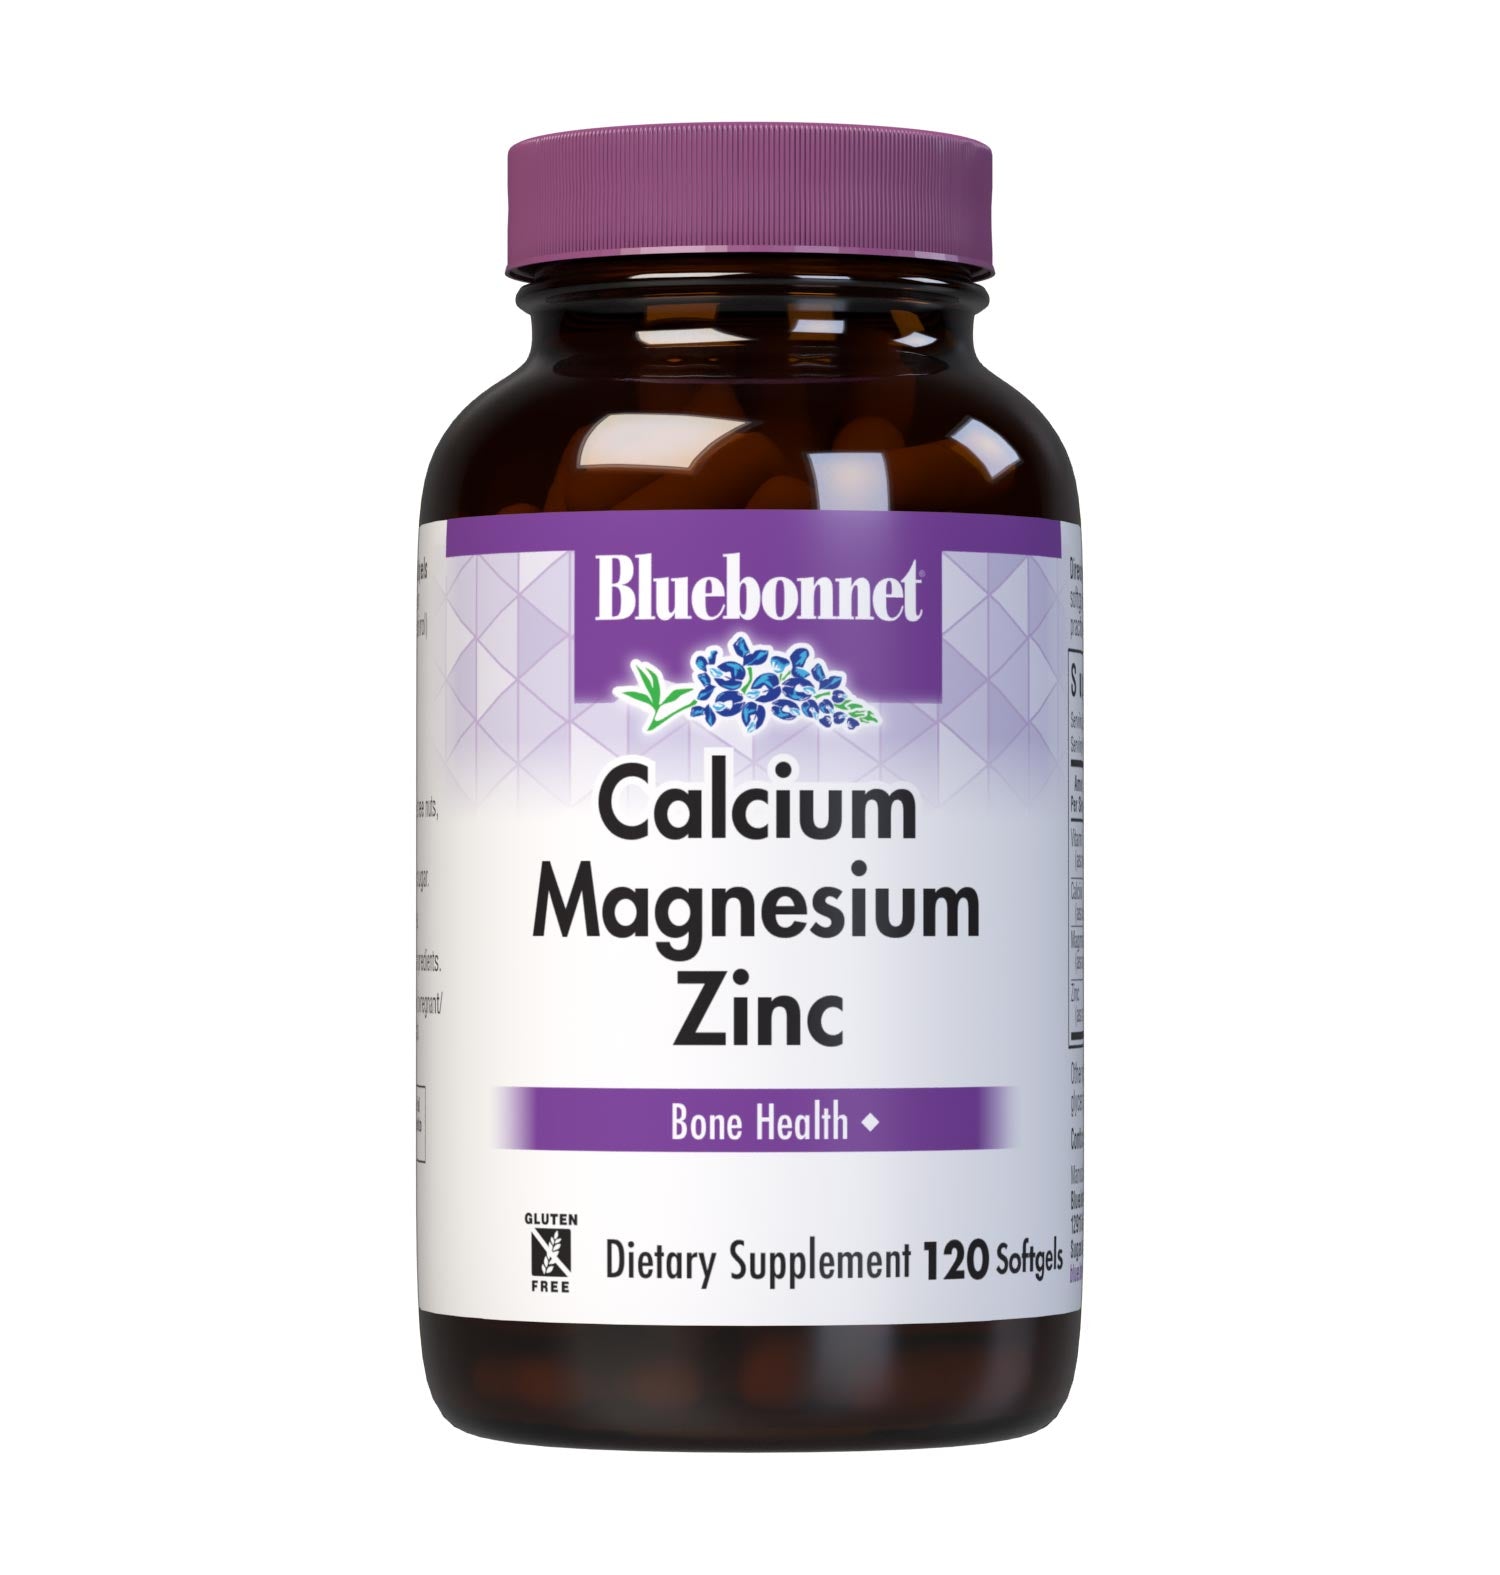 Bluebonnet's Calcium Magnesium Zinc 60 Softgels are formulated with a combination of calcium, magnesium, zinc high potency combination of calcium, magnesium, zinc, and vitamin D3 (cholecalciferol) from lanolin for strong, healthy bones. #size_120 count